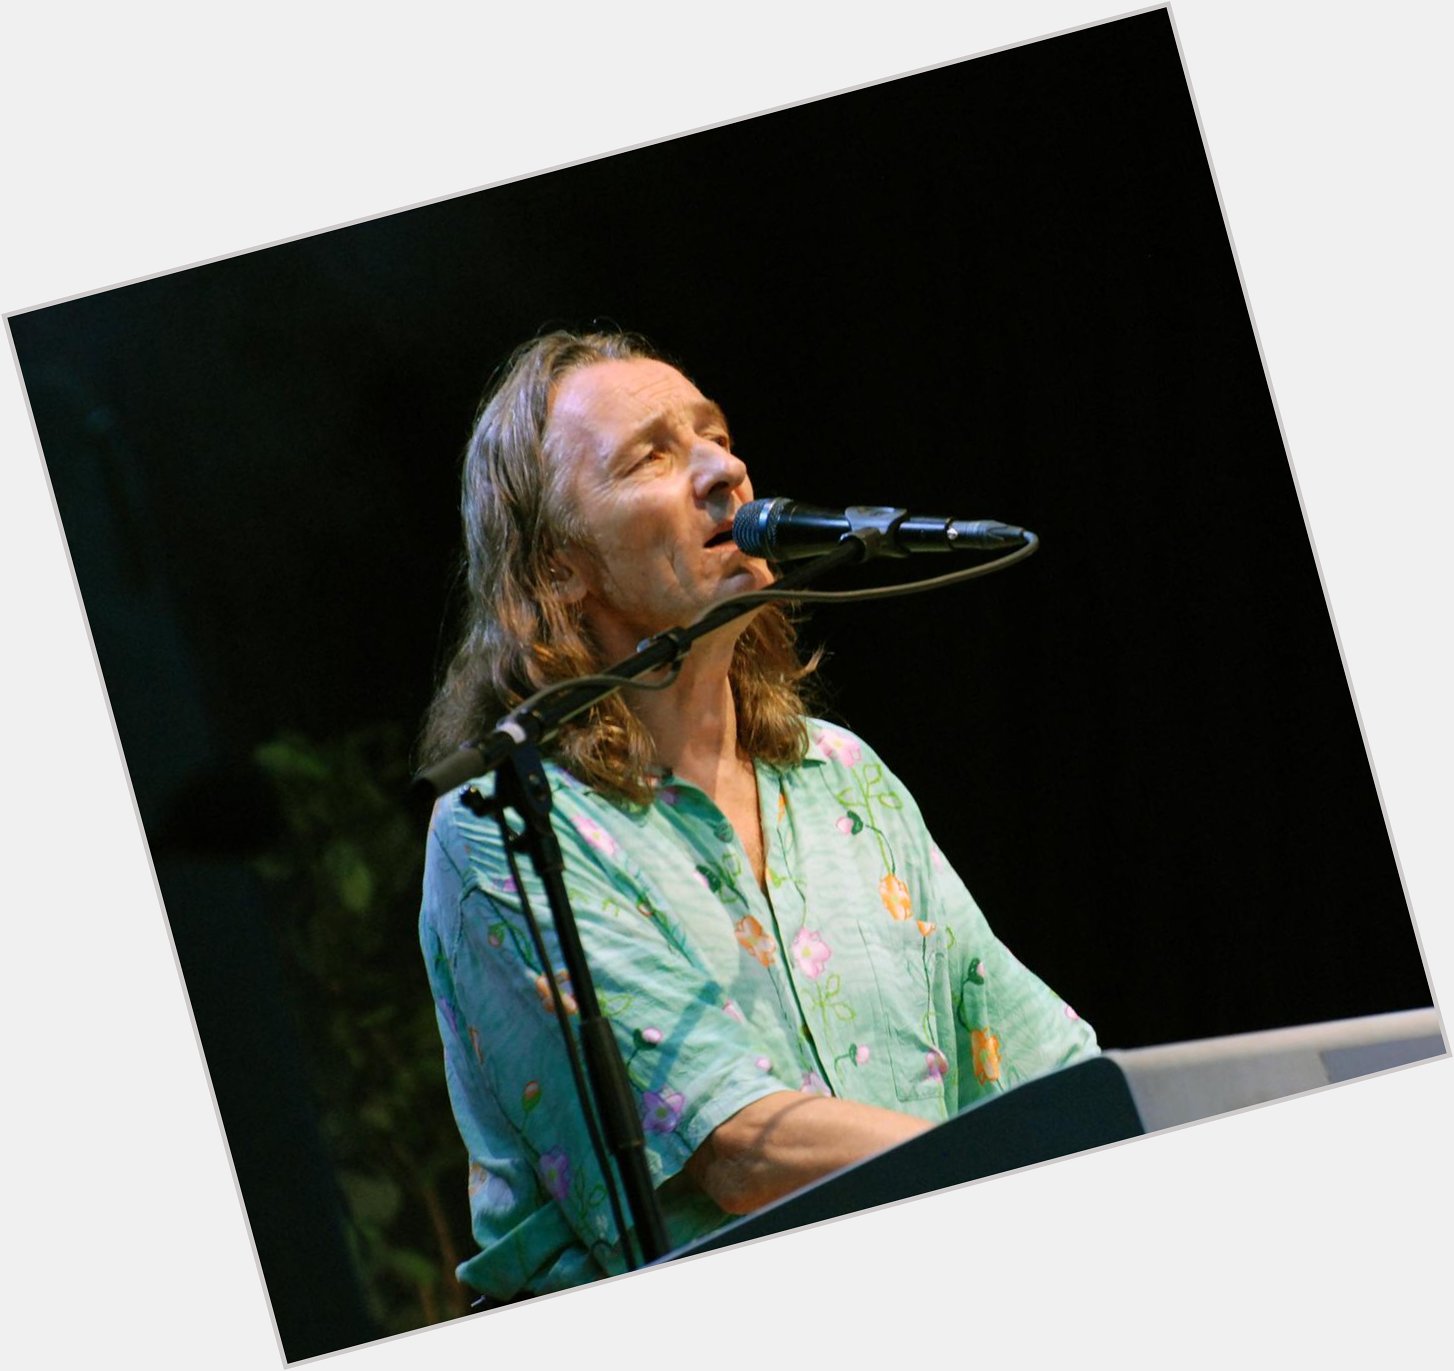 Happy Birthday Give a little bit, give a little bit of Birthday wishes to Roger Hodgson today! 